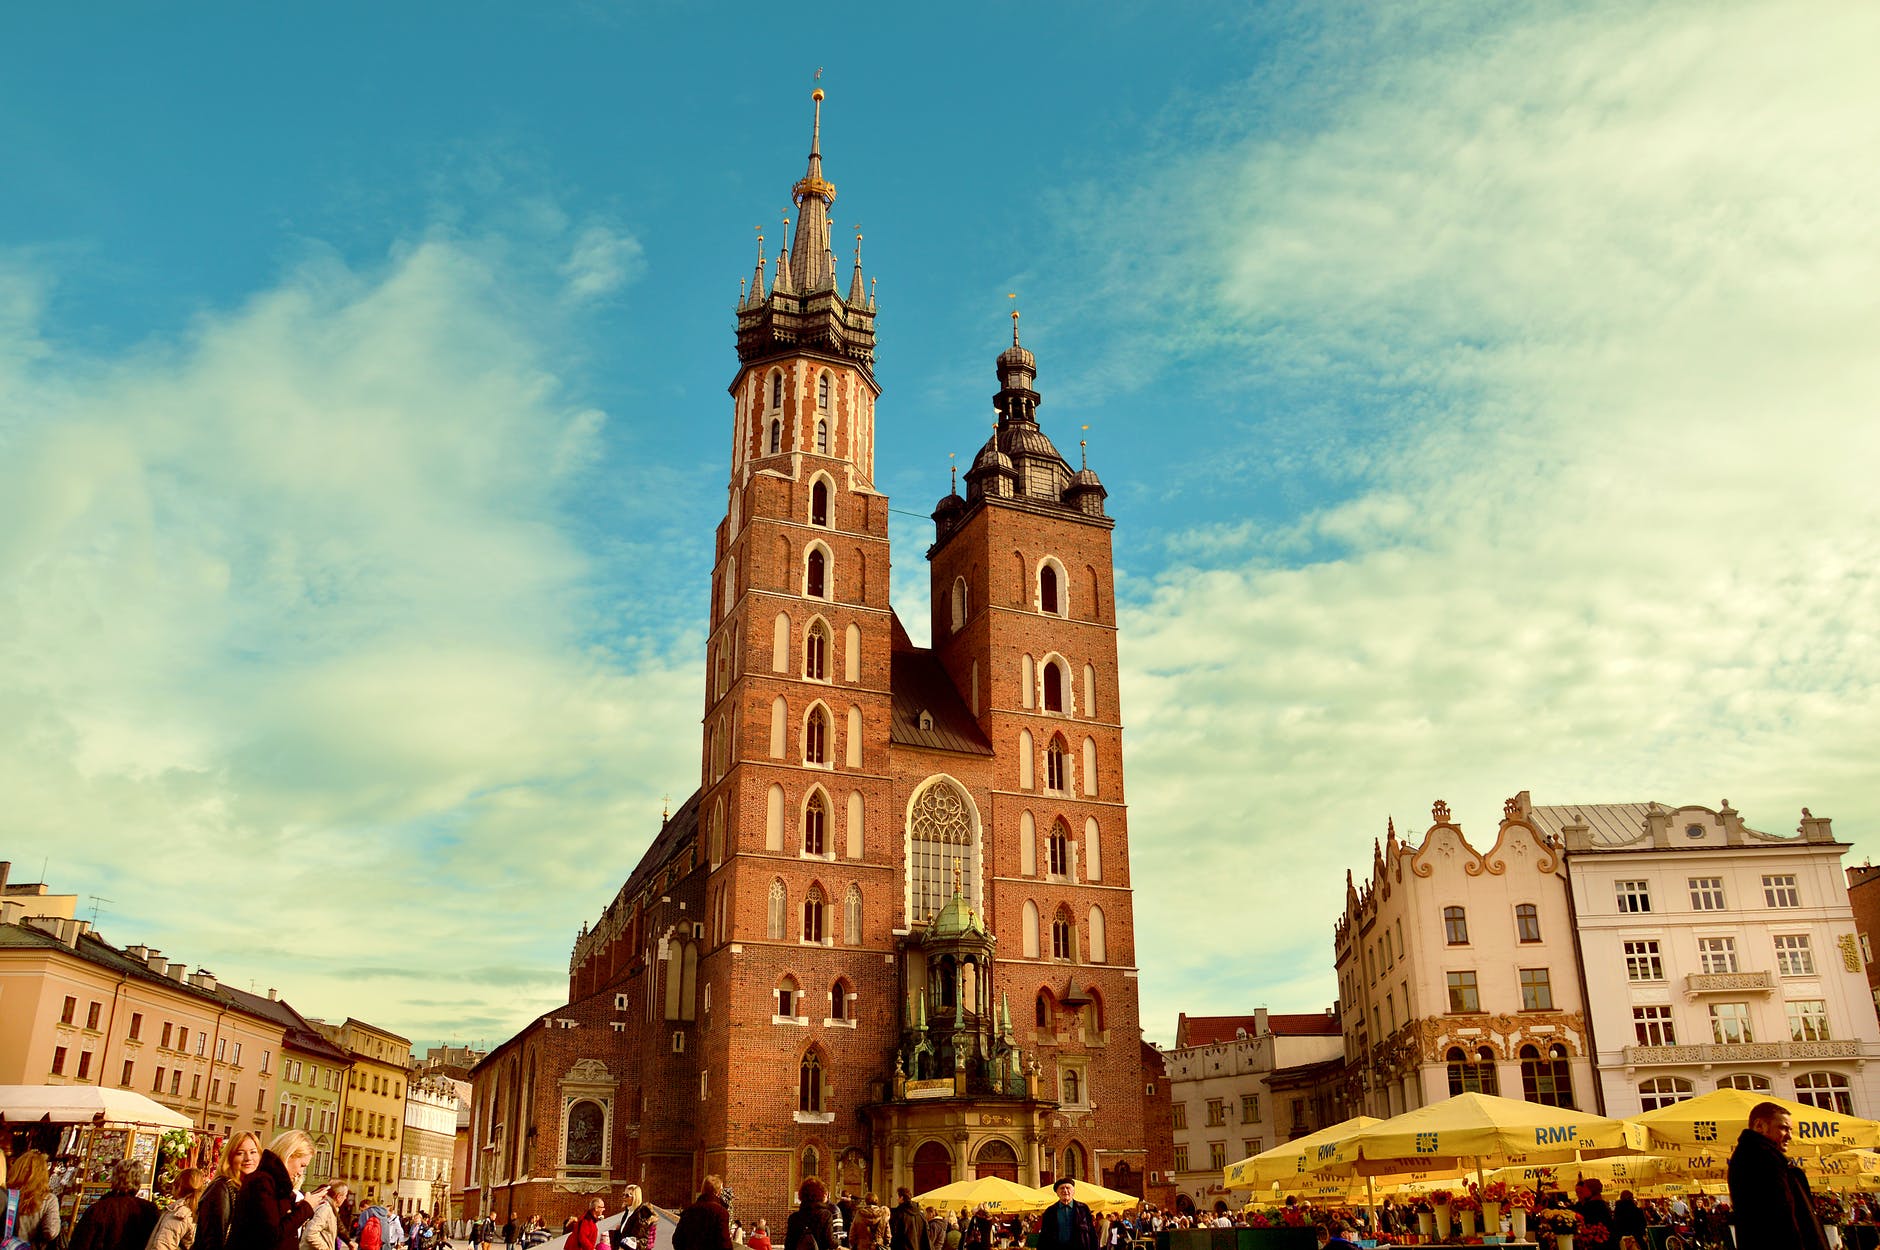 The best thing about Poland is that it is the ideal place to travel alone, as its railways are accessible and safe. This beautiful and colorful country is steeped in history. If you have the chance to visit the cities of Krakow and Warsaw you'll be able to connect with the country's past and its scars from WW2. 